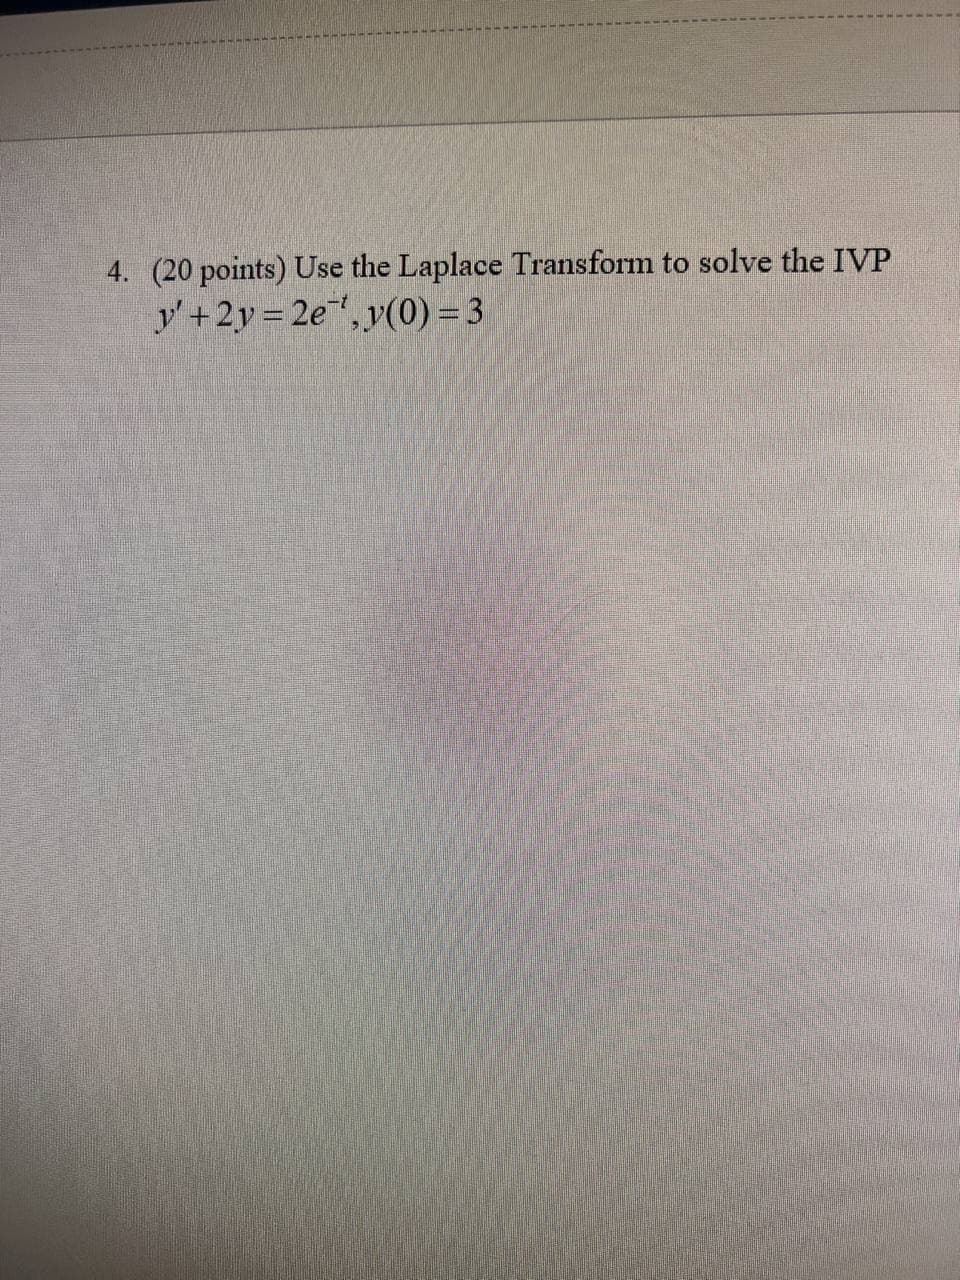 4. (20 points) Use the Laplace Transform to solve the IVP
y' +2y 2e", y(0) = 3
